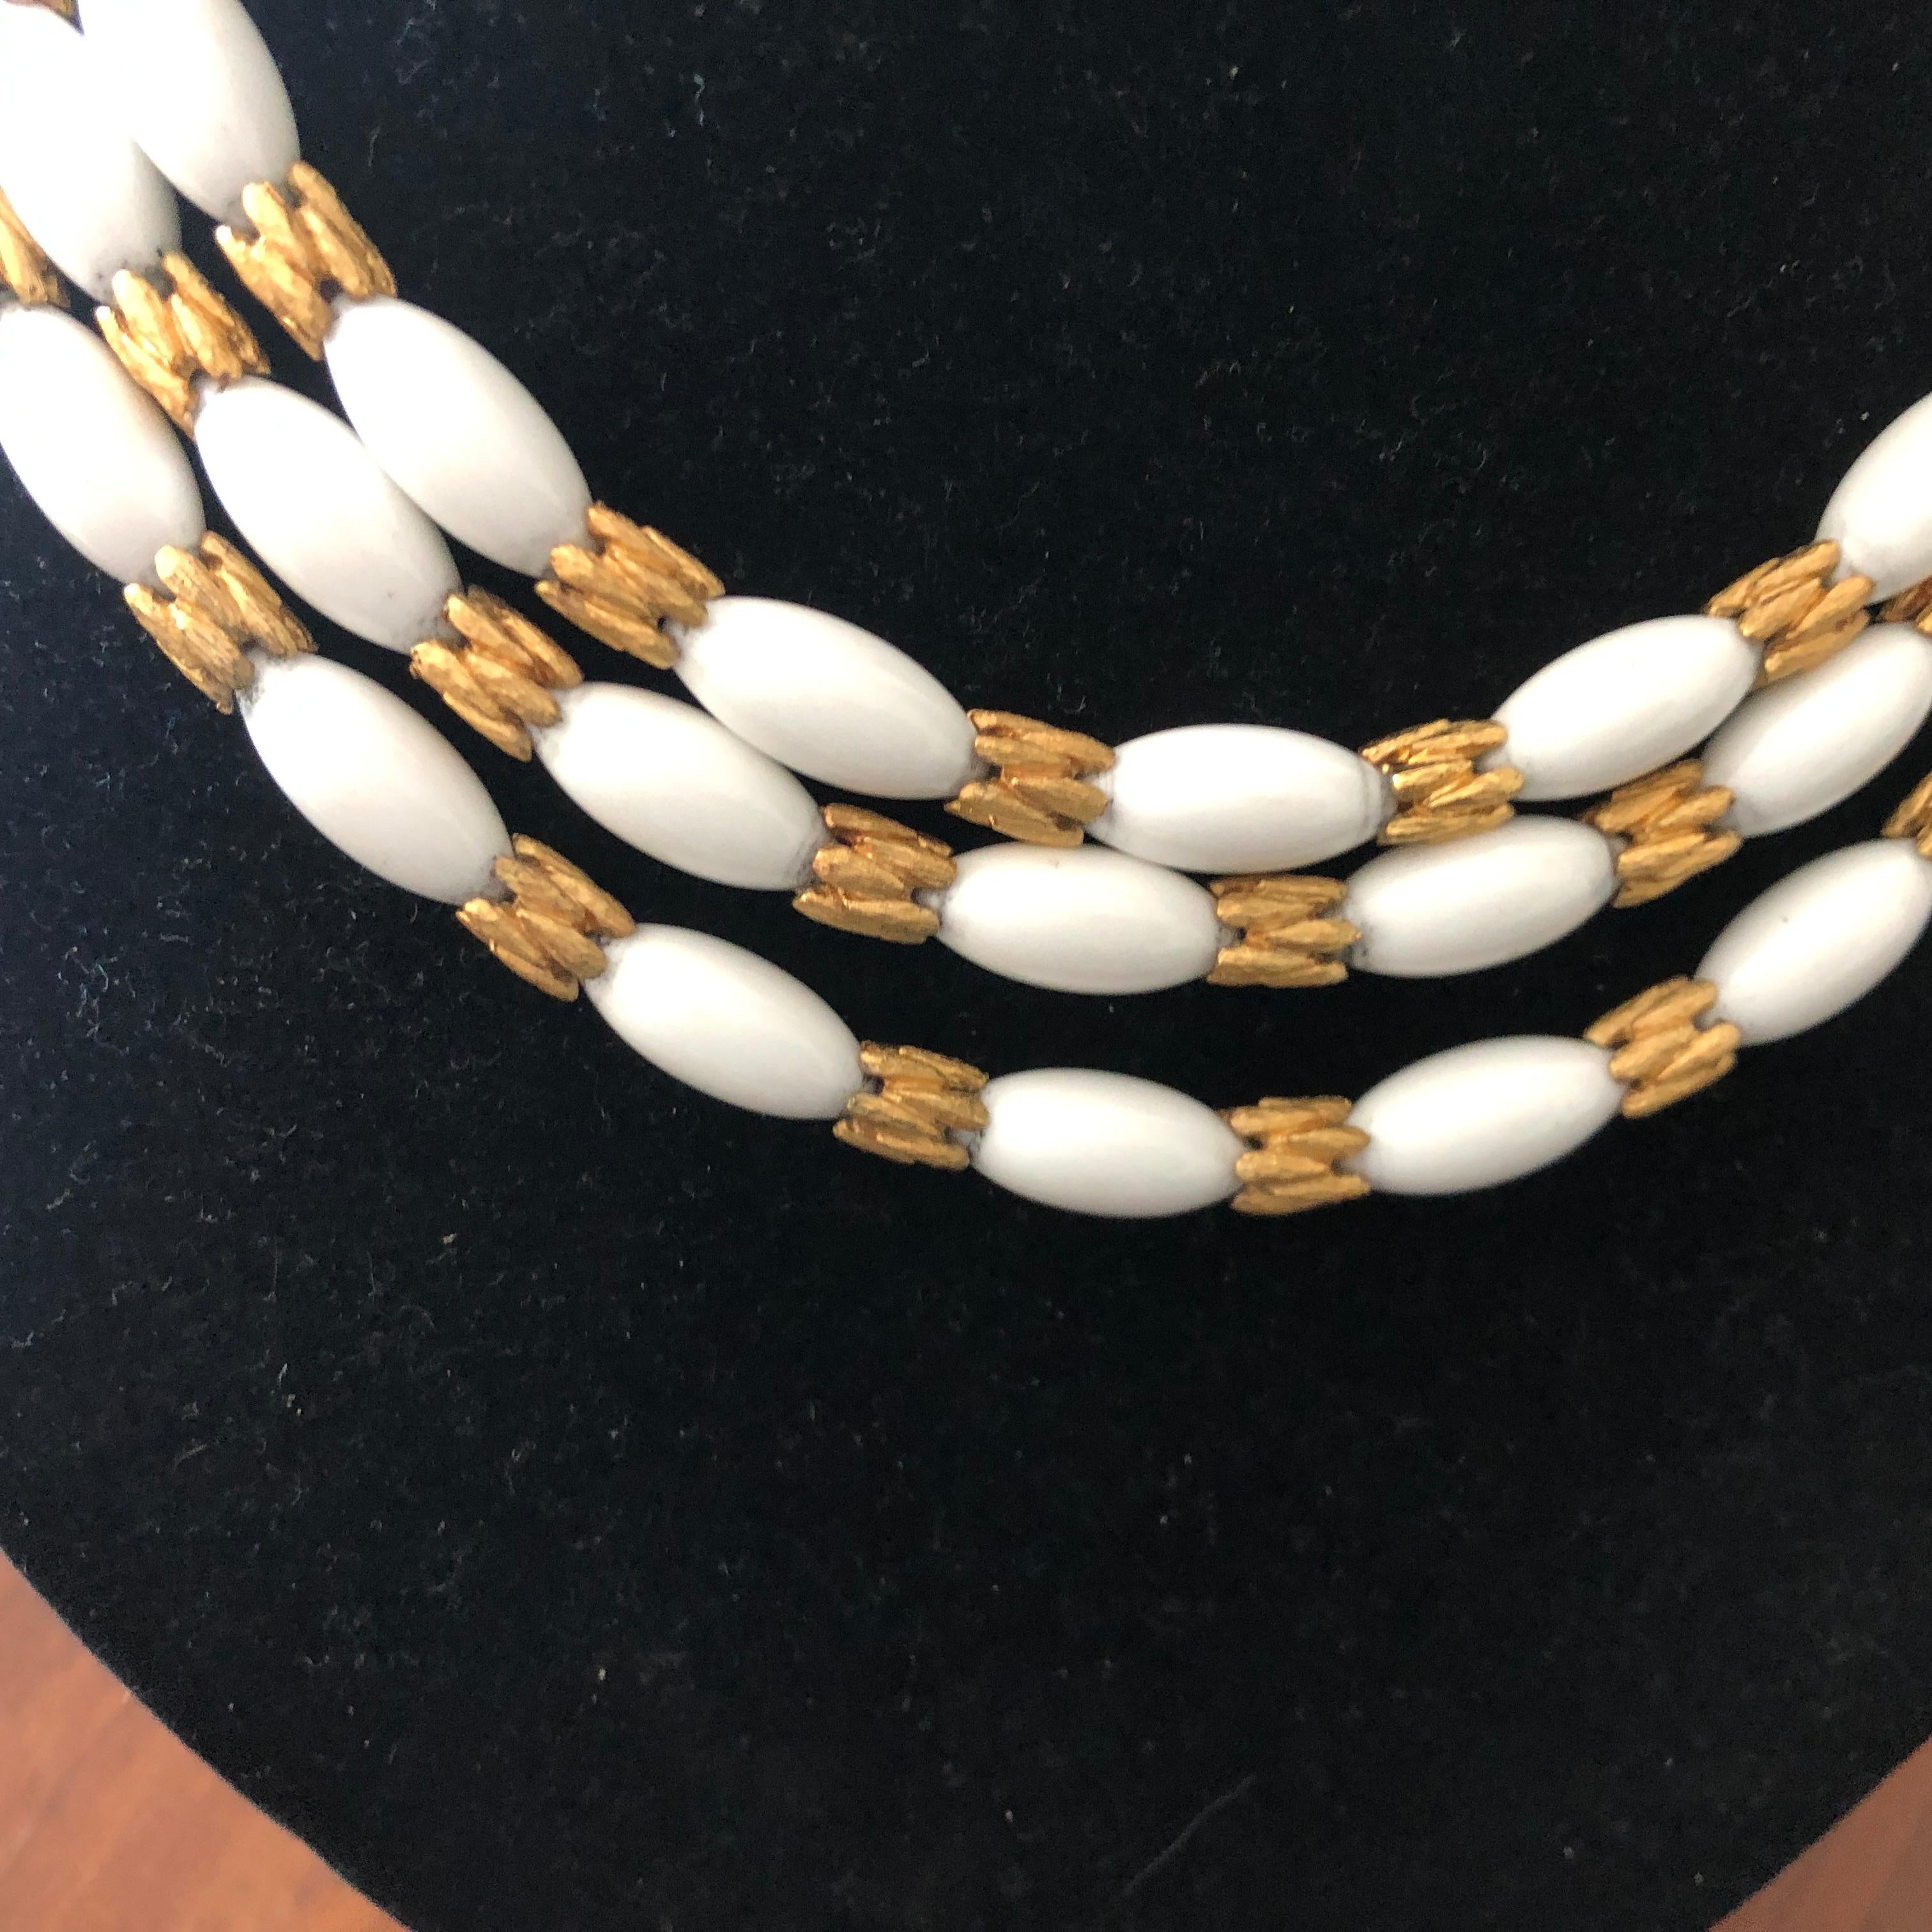 A vintage chocker necklace by Trifari, made in U.S. in the Sixties, good conditions overall